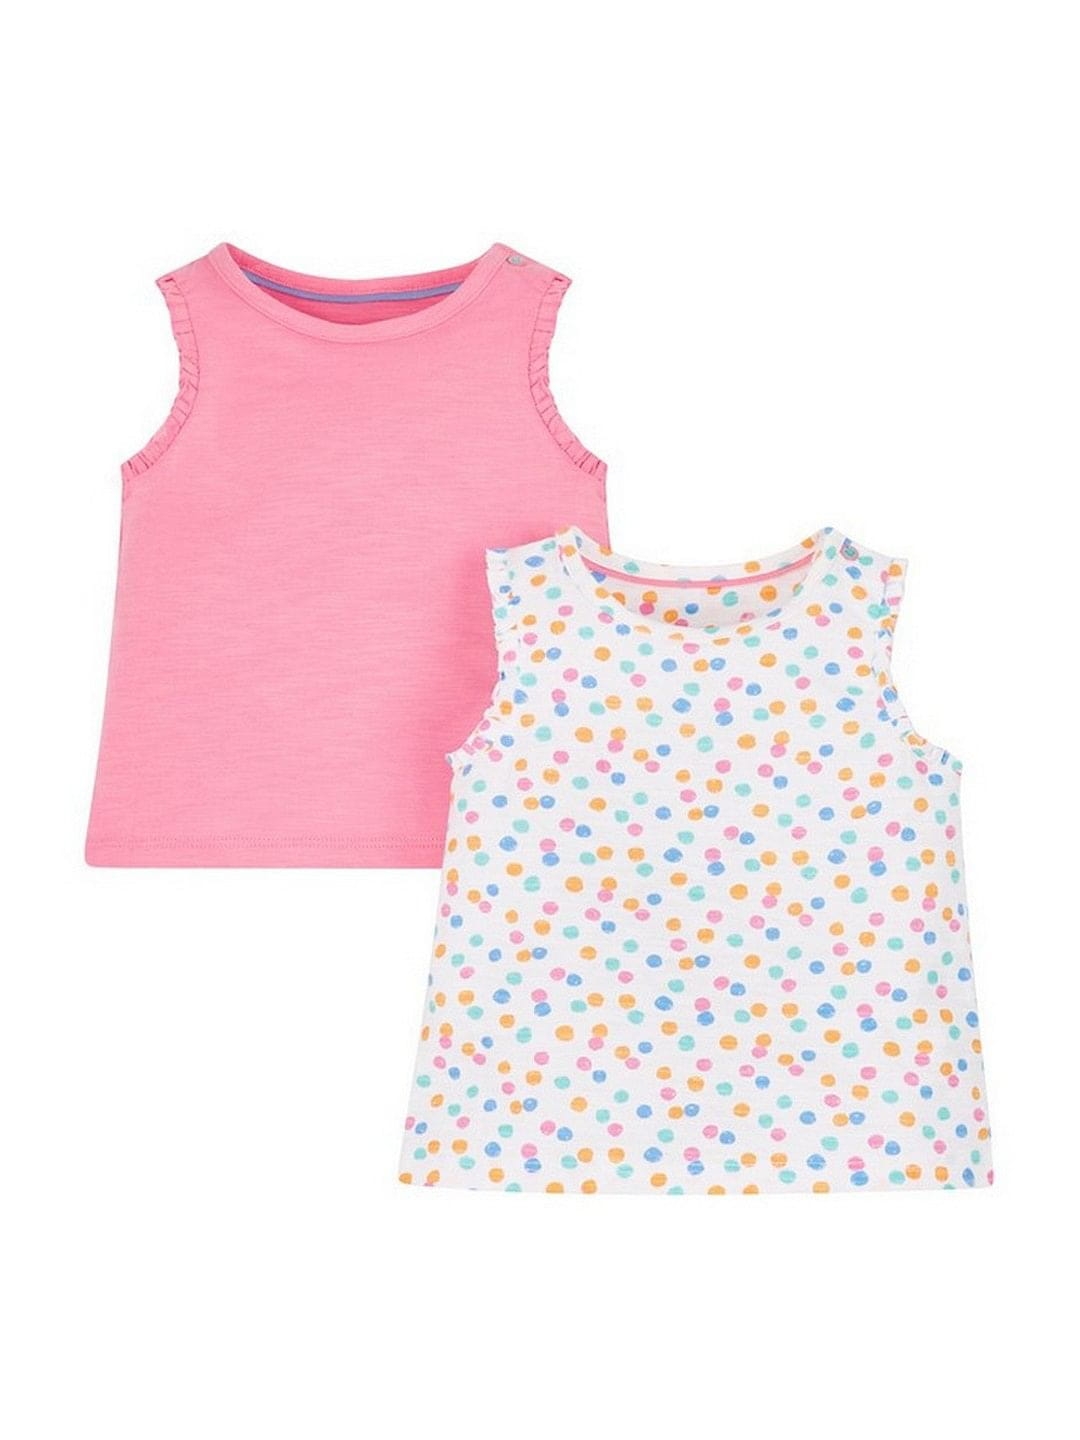 Mothercare | White and Pink Printed Top - Pack of 2 0